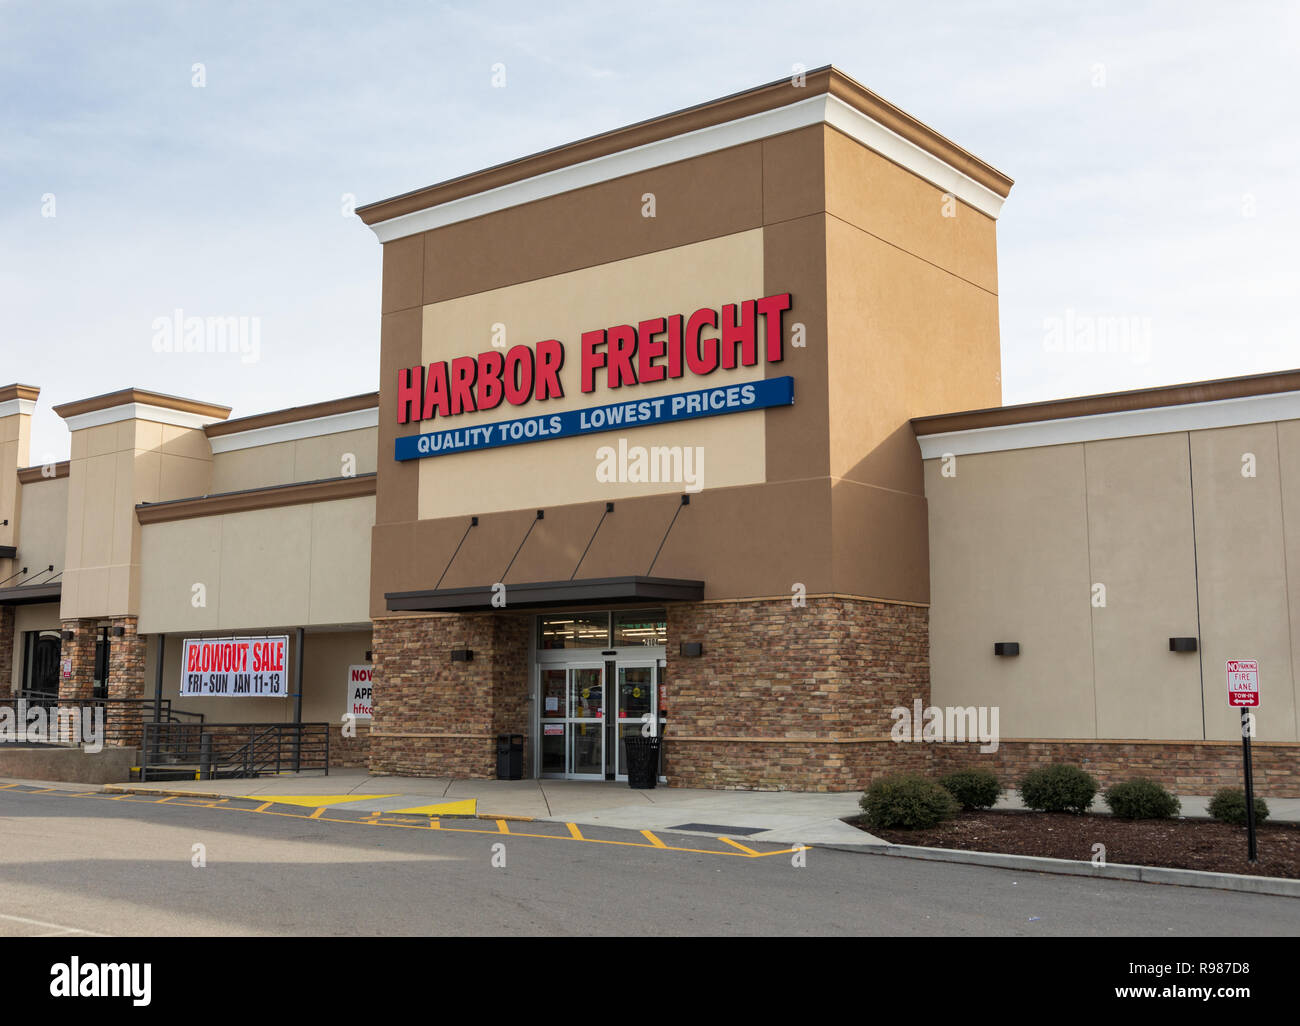 Hickory Nc Usa 12 19 18 A Local Harbor Freight Store Discount Retailer Of Tools And Equipment The Over 800 Store Chain Is Headquartered In Calab Stock Photo Alamy